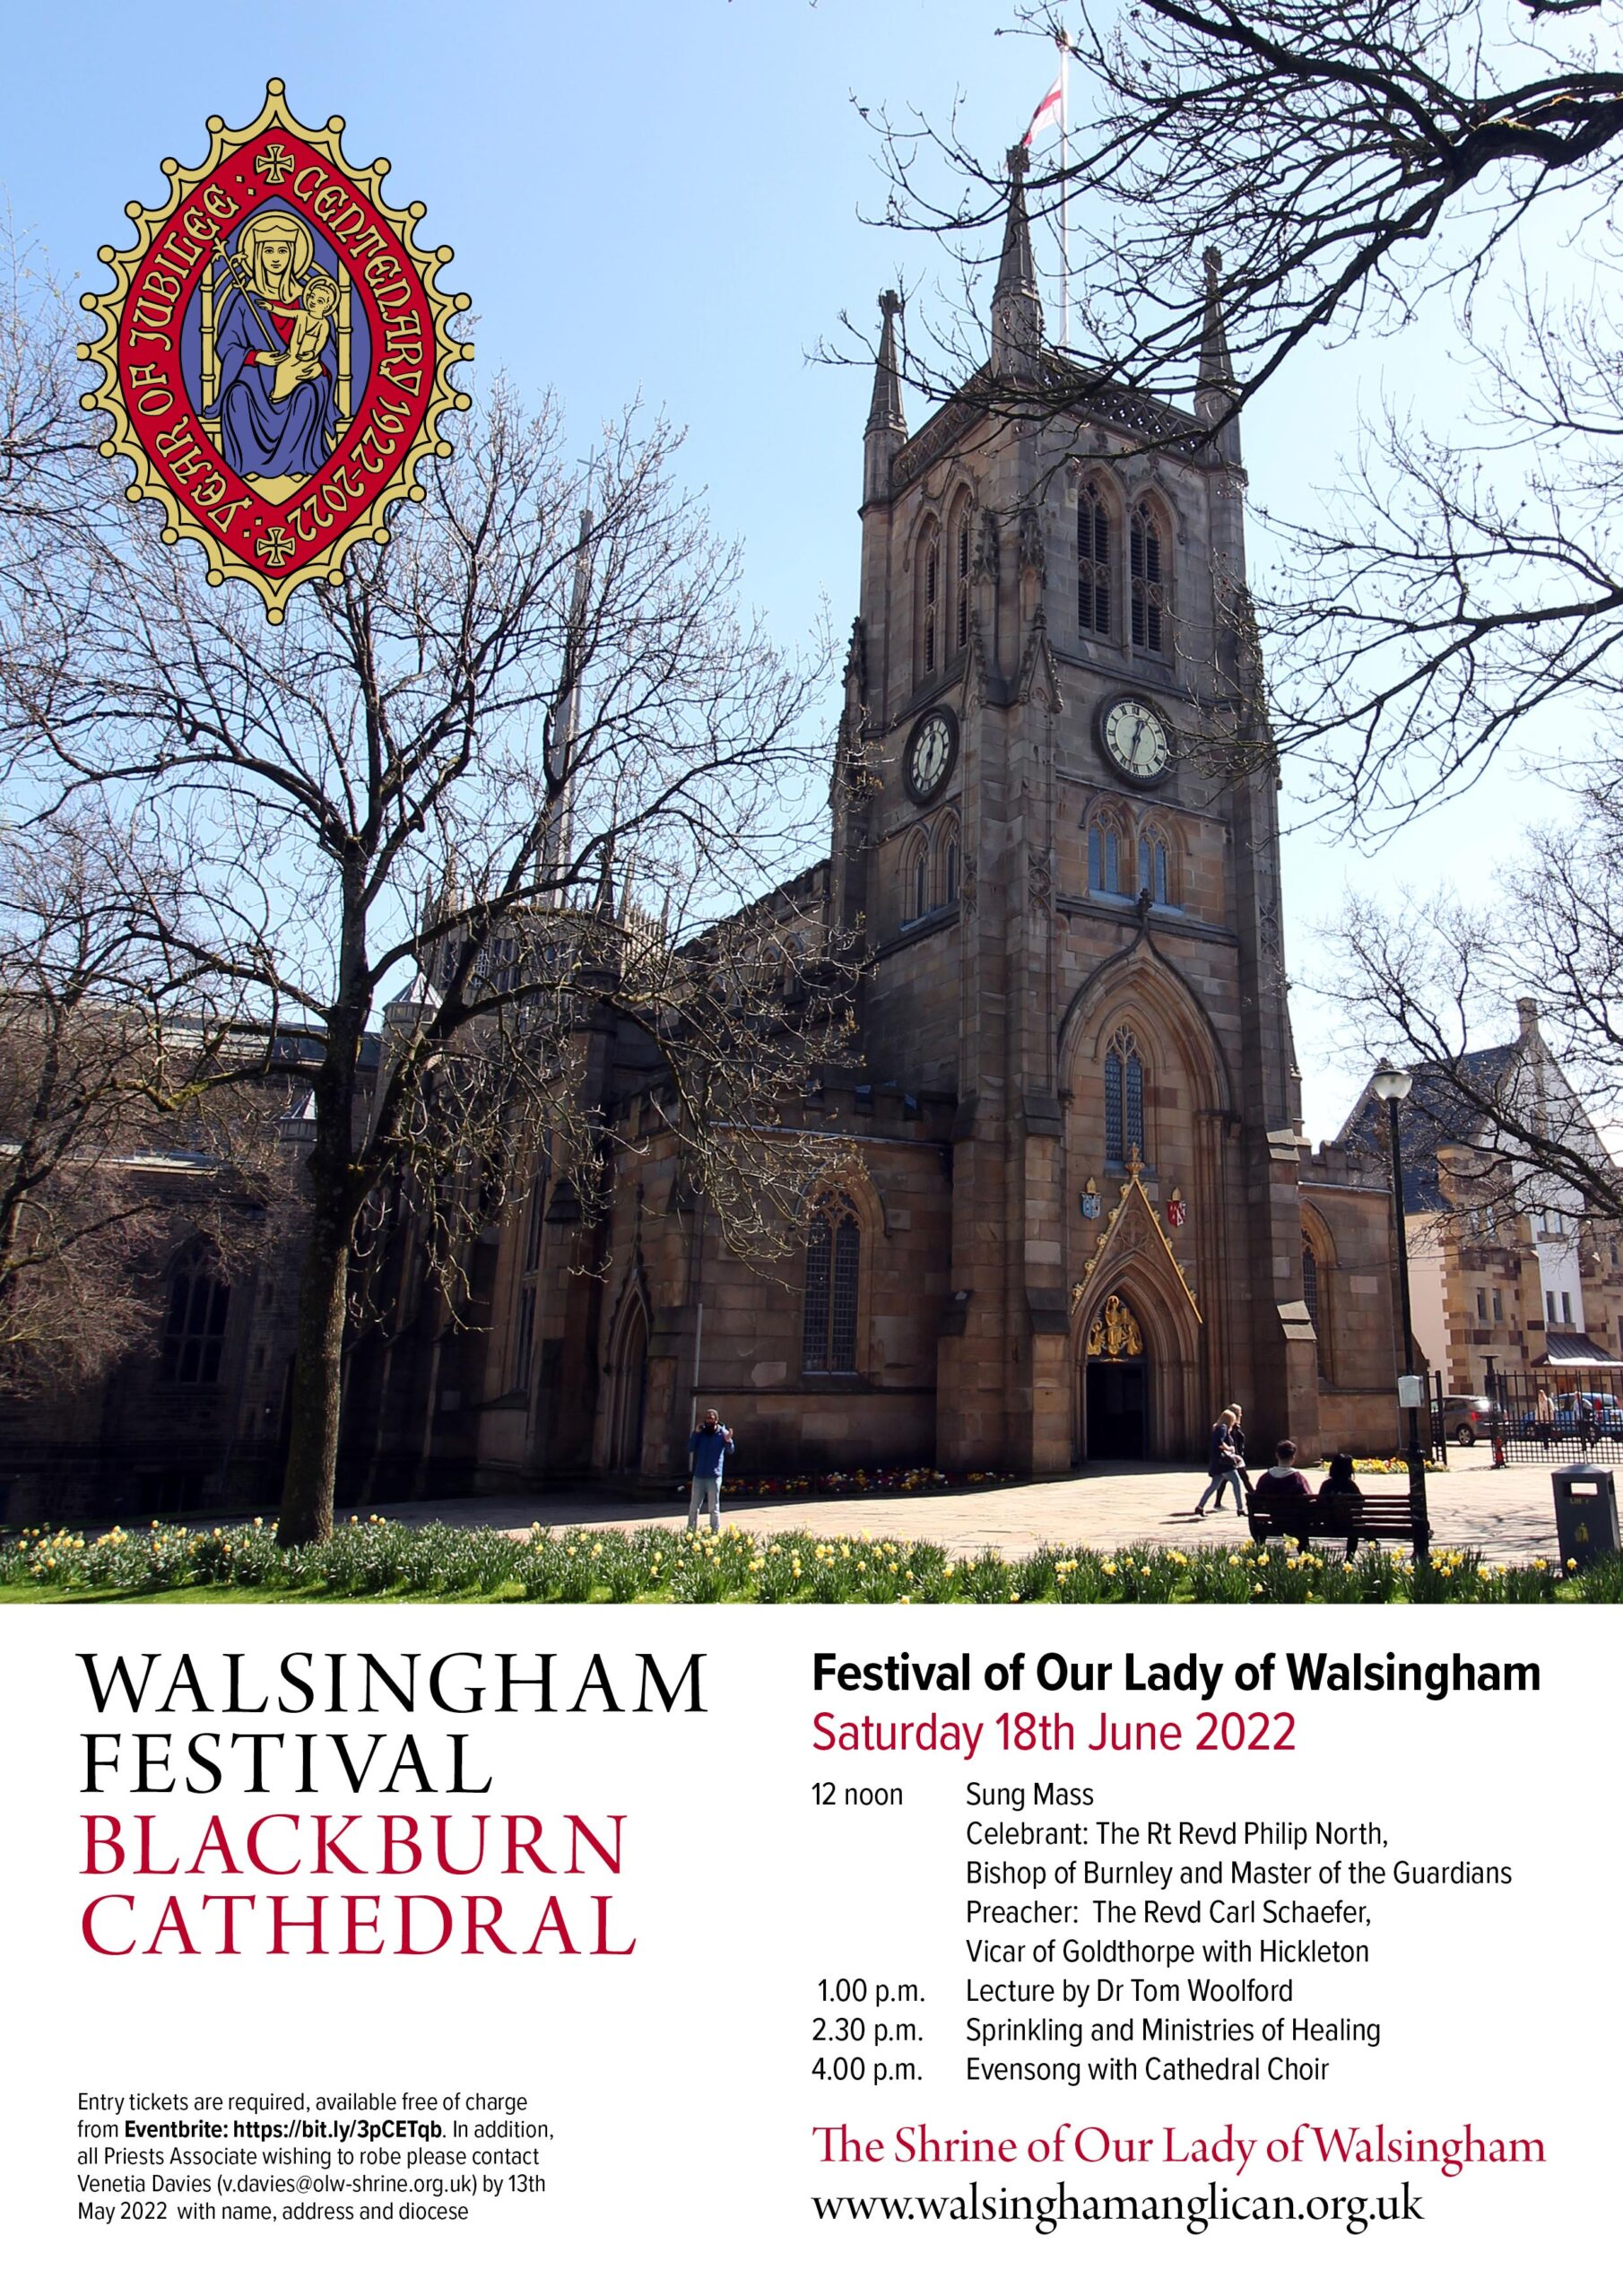 Festival of Our Lady of Walsingham at Blackburn Cathedral